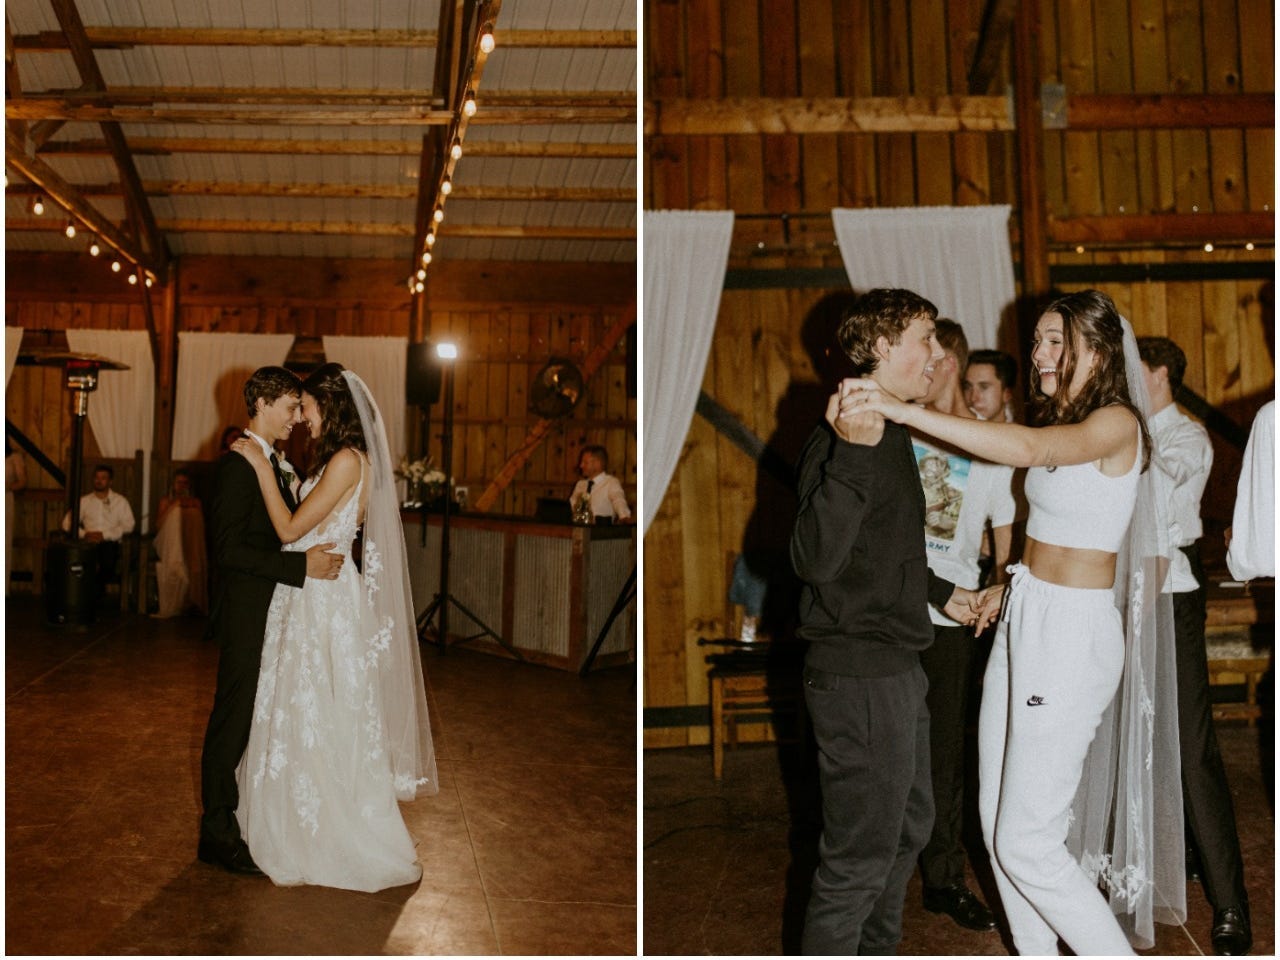 Gunner and Alayna Tripp on their wedding evening, before and after they changed into sweat suits.